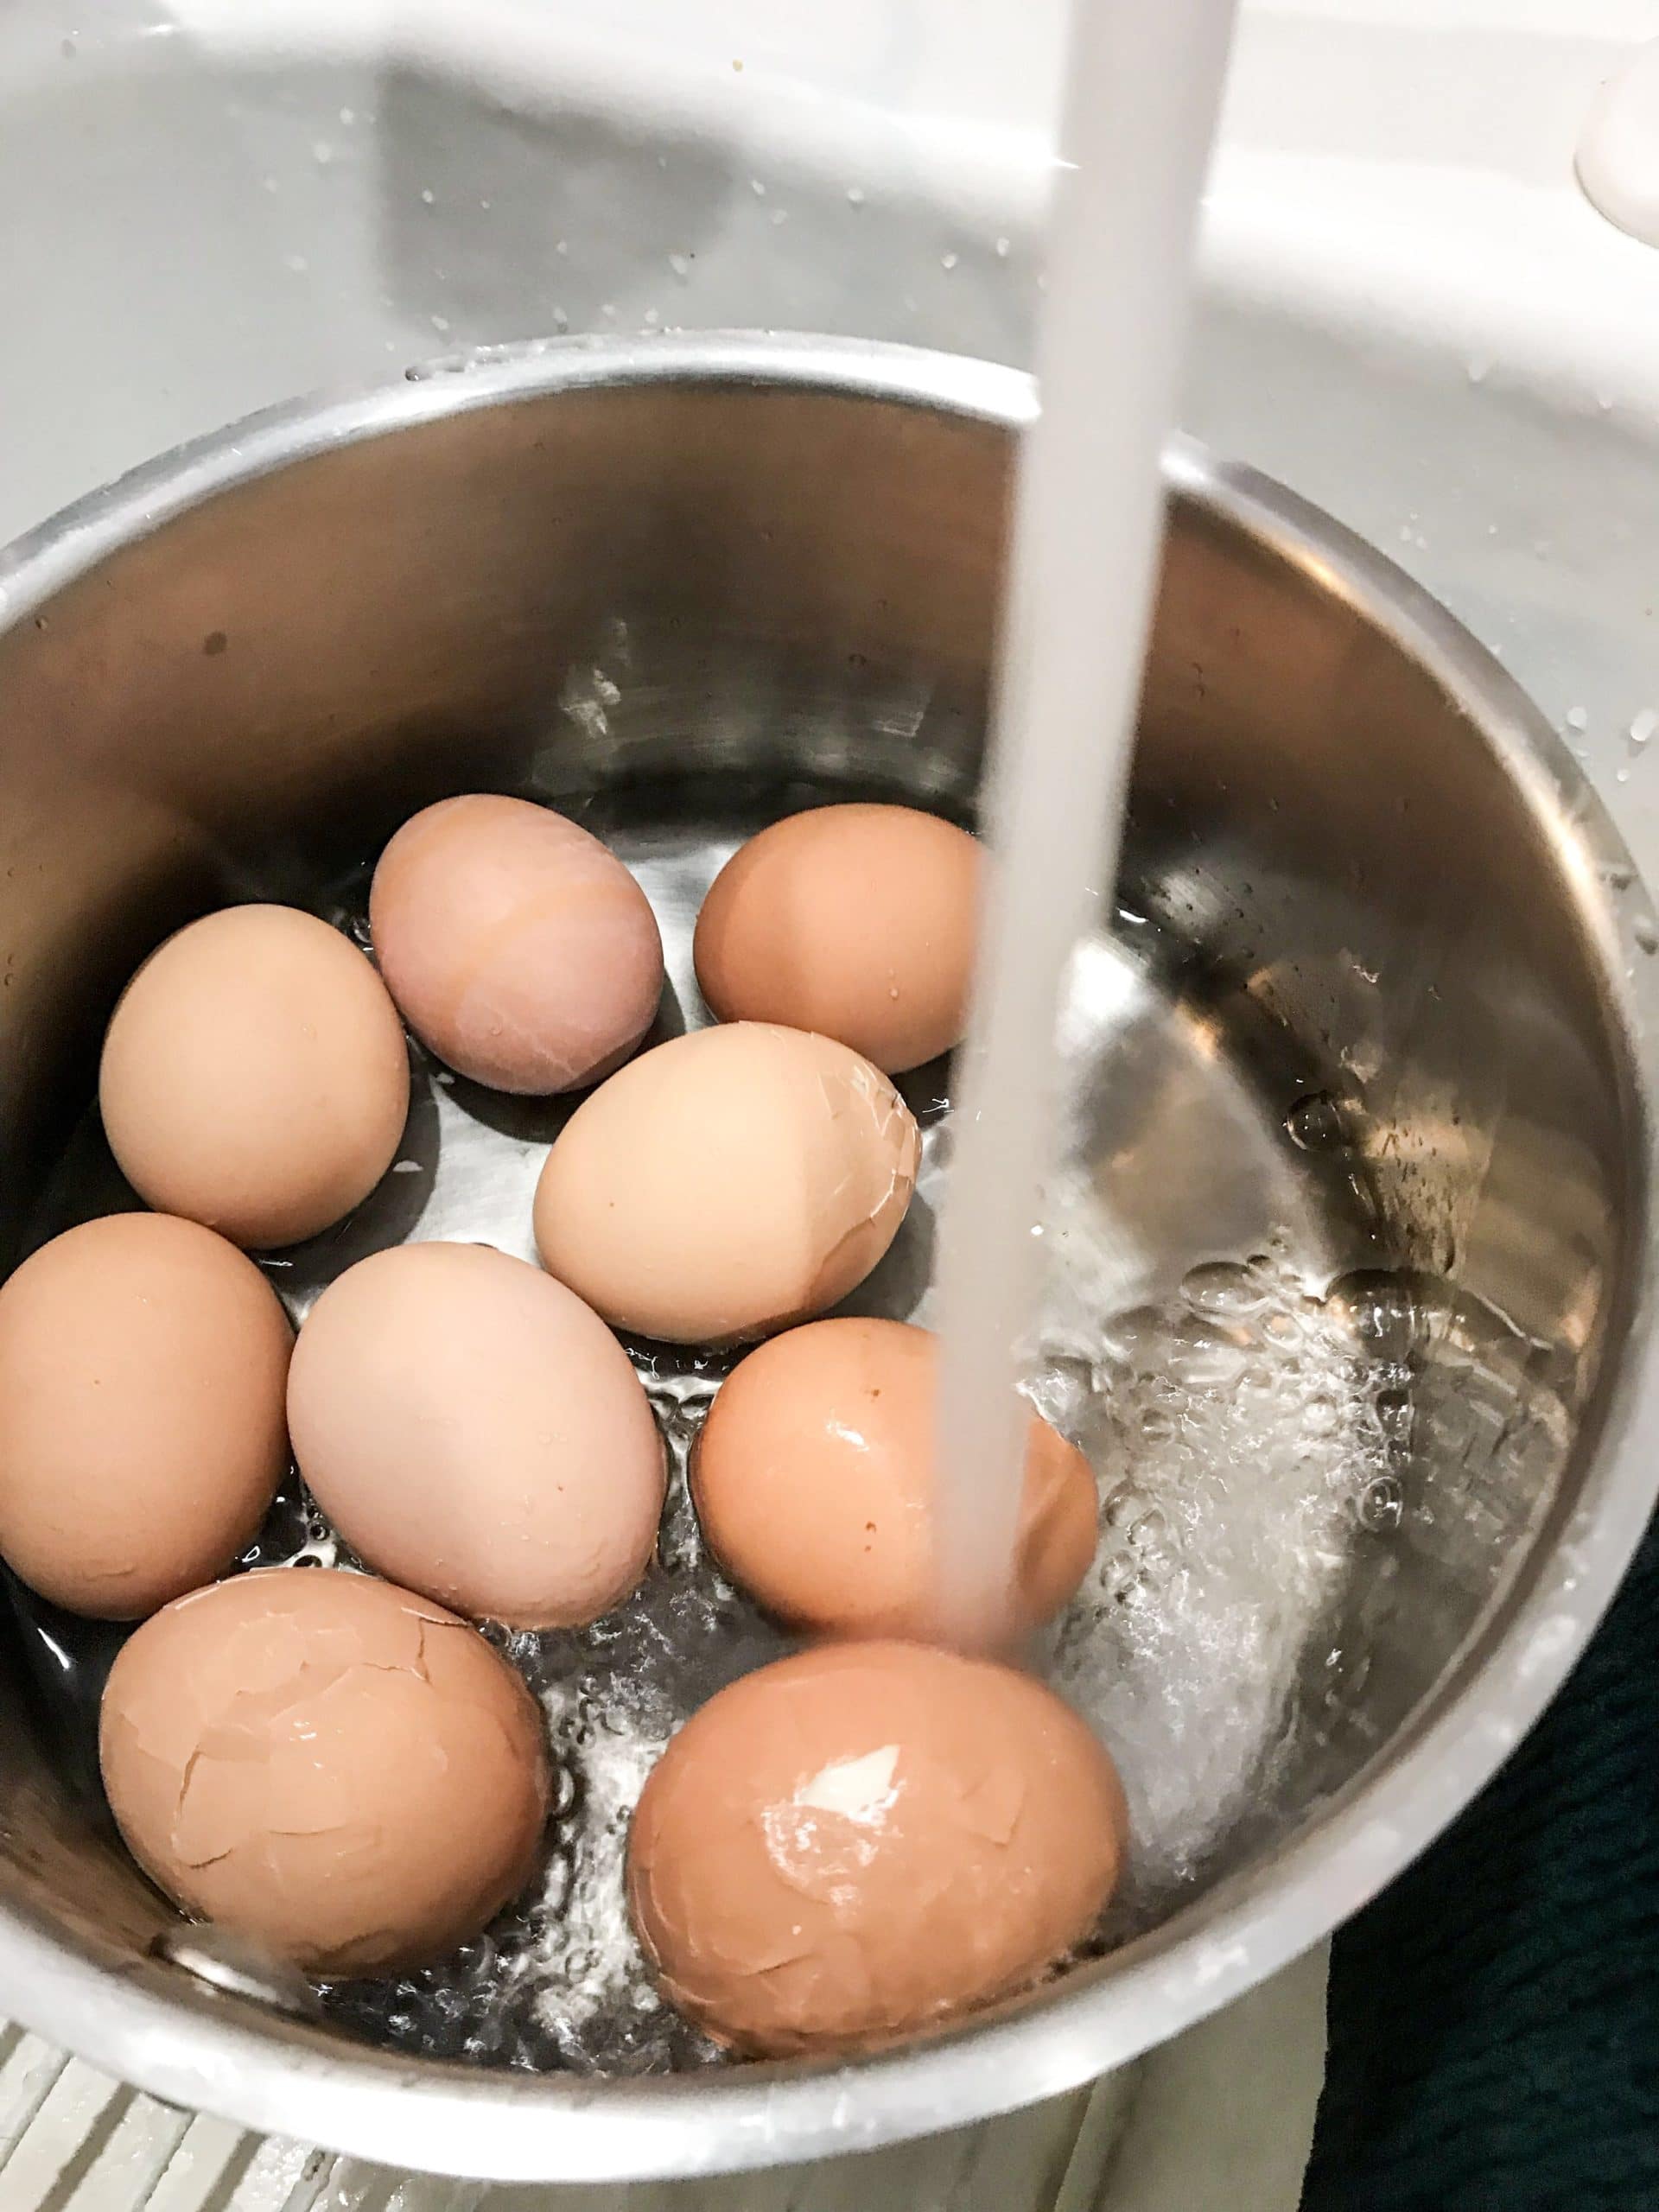 Run cold water over the eggs to stop the cooking process